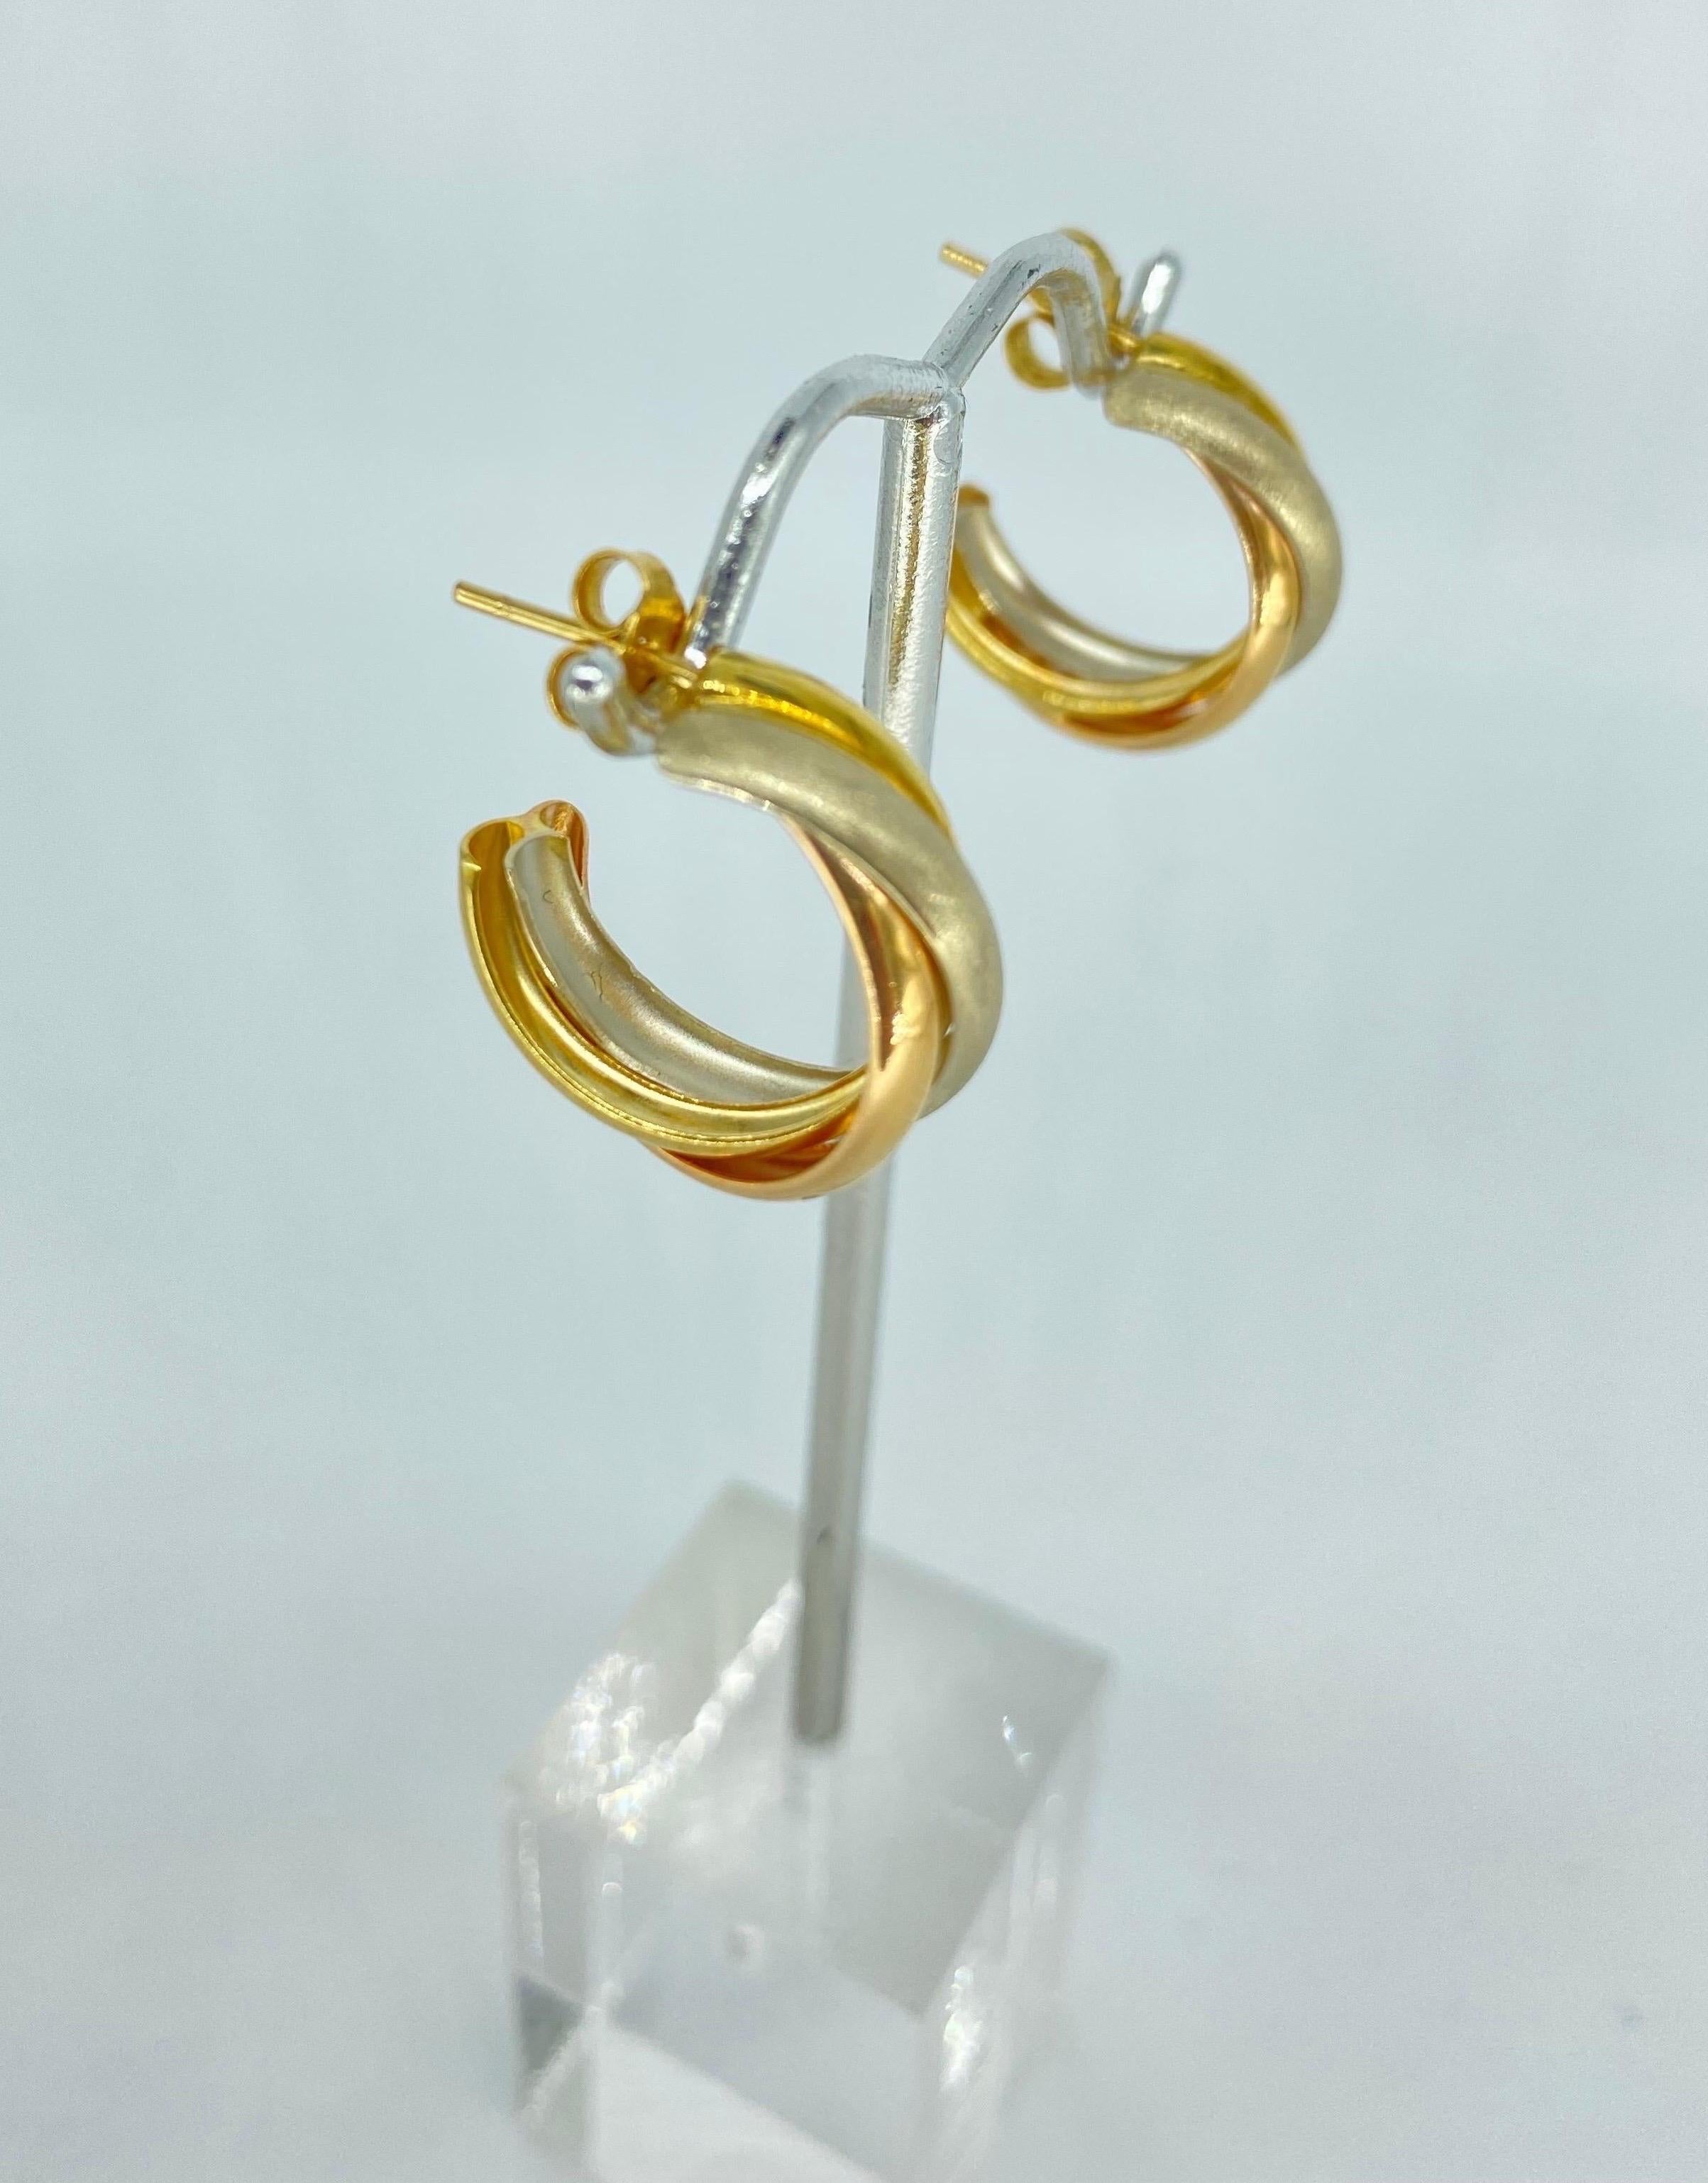 Vintage Trinity Interlaced Rose White Yellow 18k Gold Hoop Earrings In Excellent Condition For Sale In Miami, FL